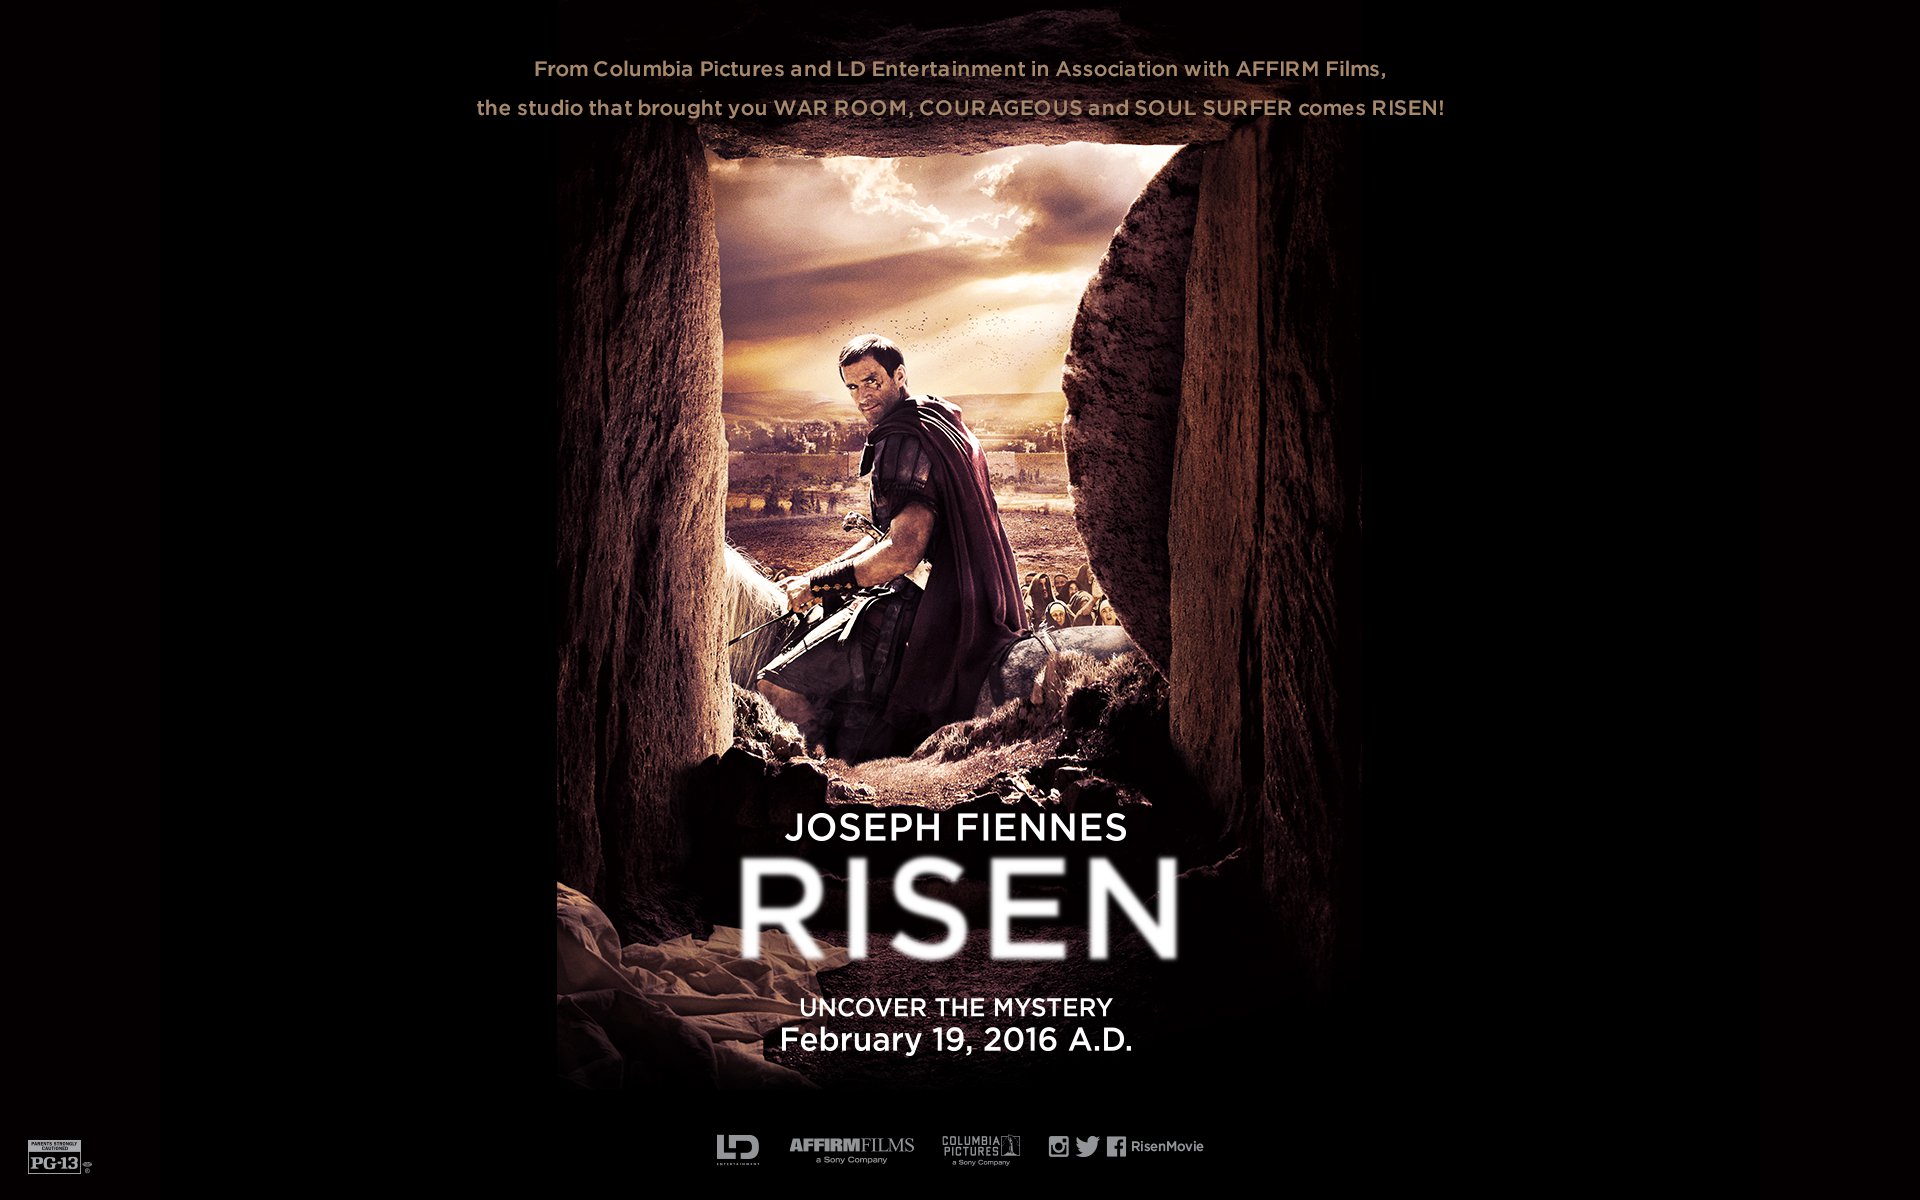 download the new Risen